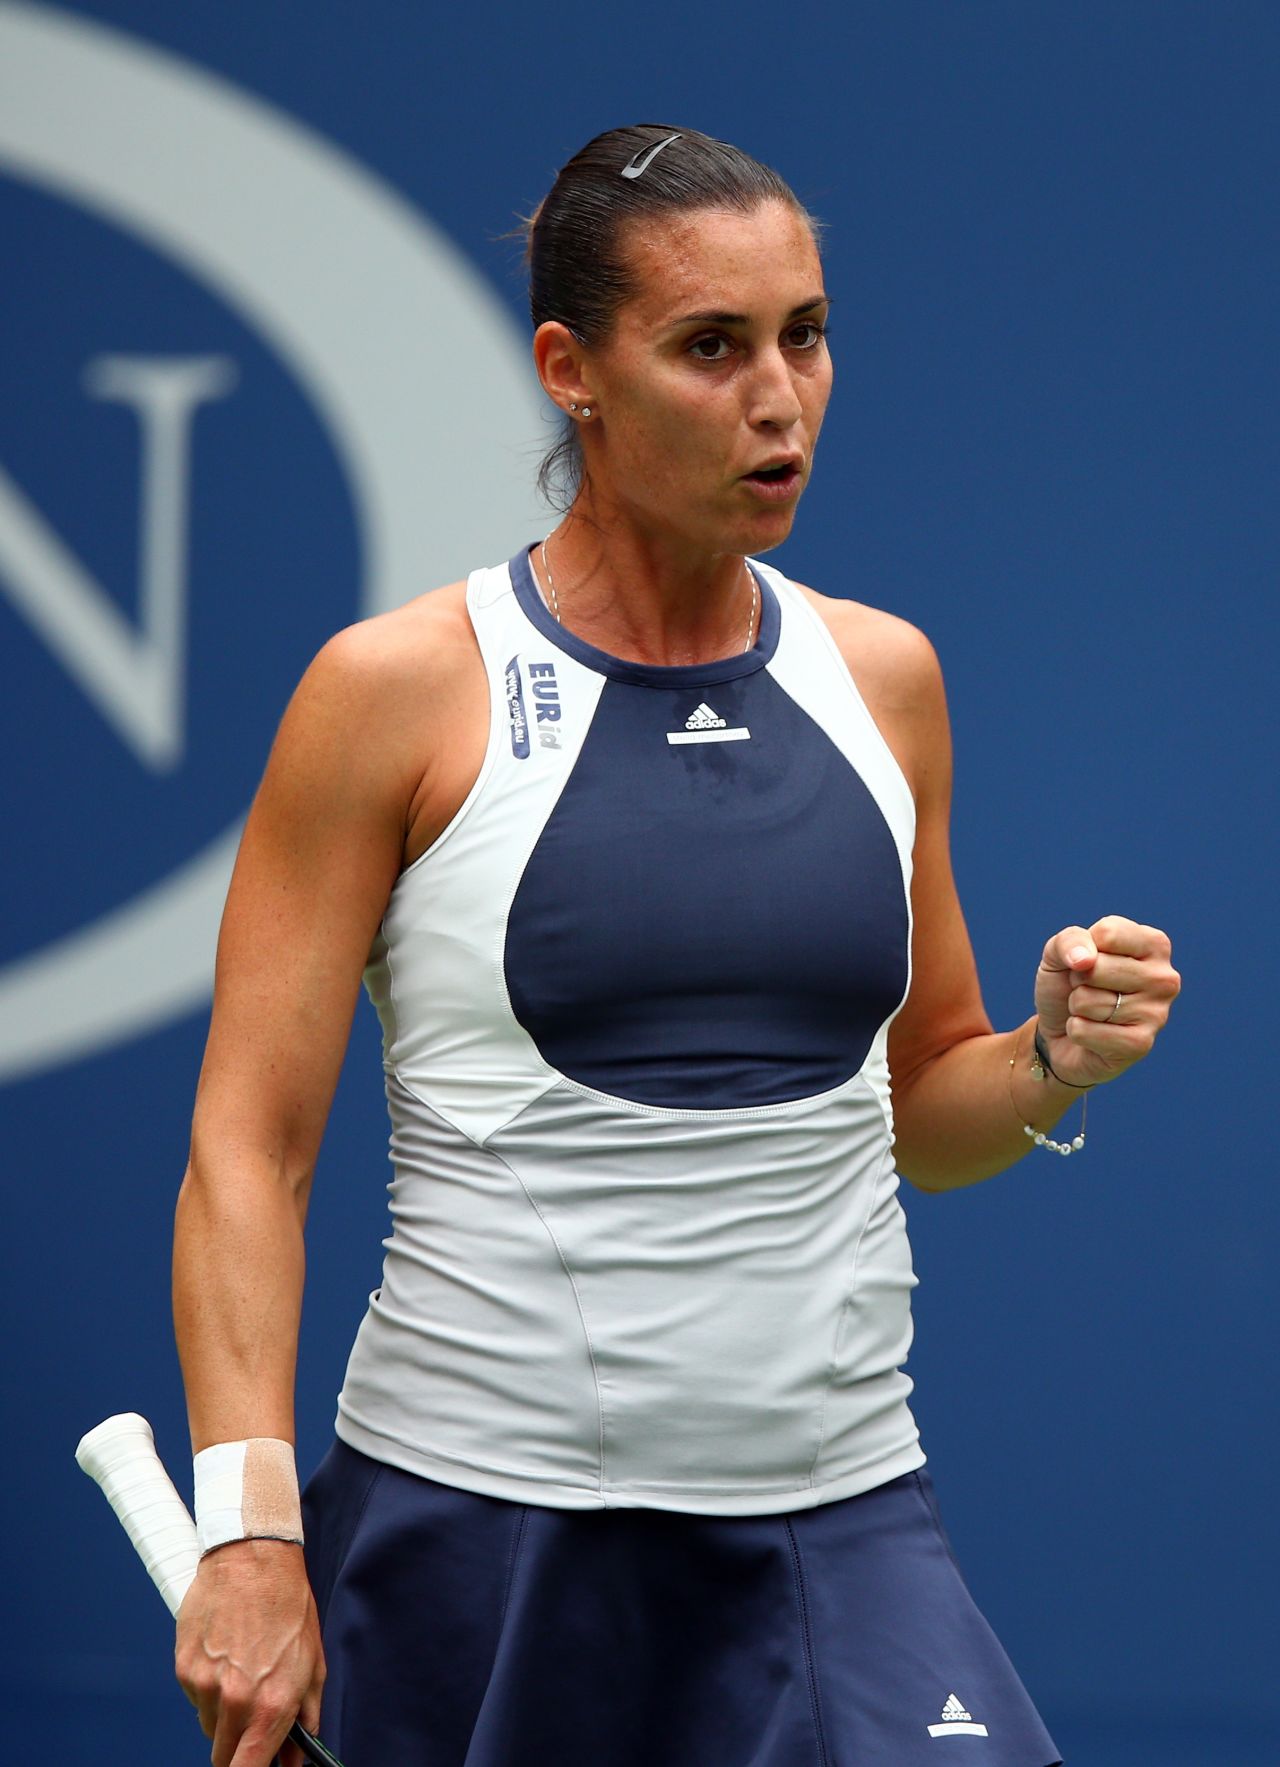 Pennetta struck the first blows in the final on the Arthur Ashe Stadium court and maintained her lead.